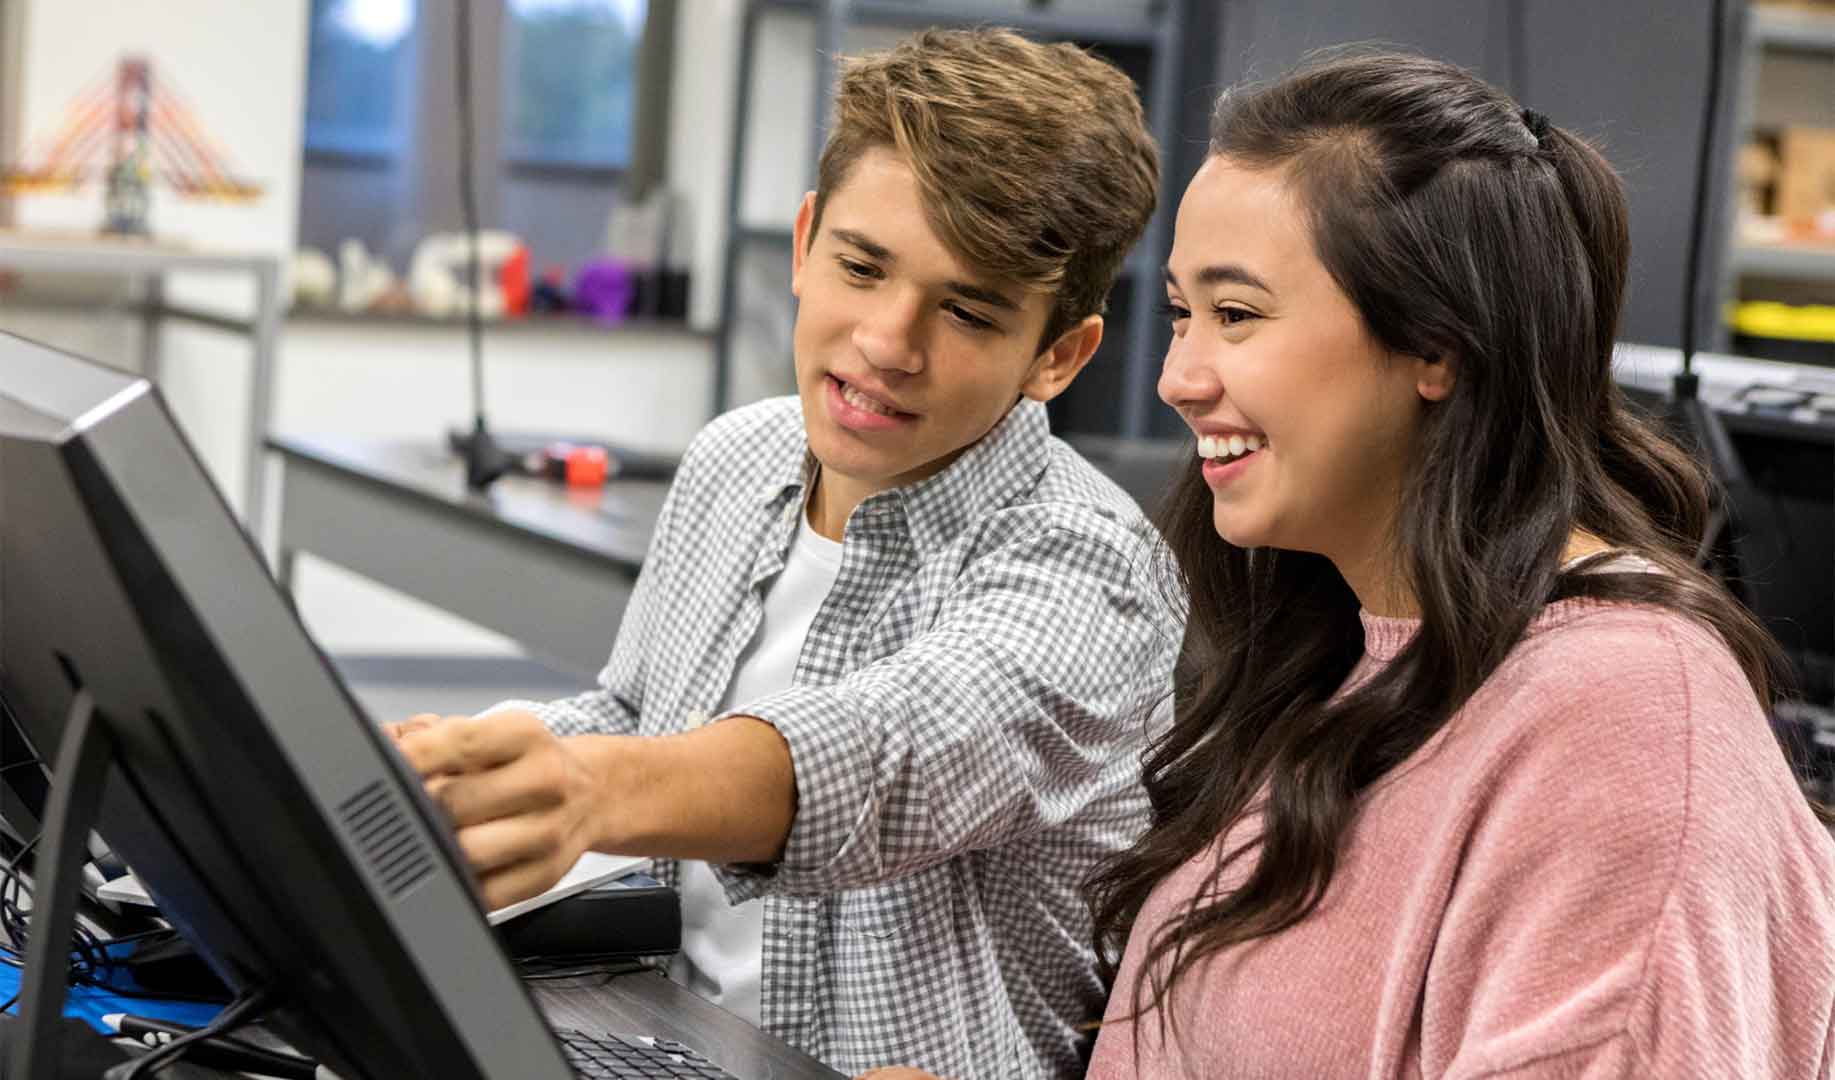 Vendasta tech camp with two kids working on a computer and smiling<br />
